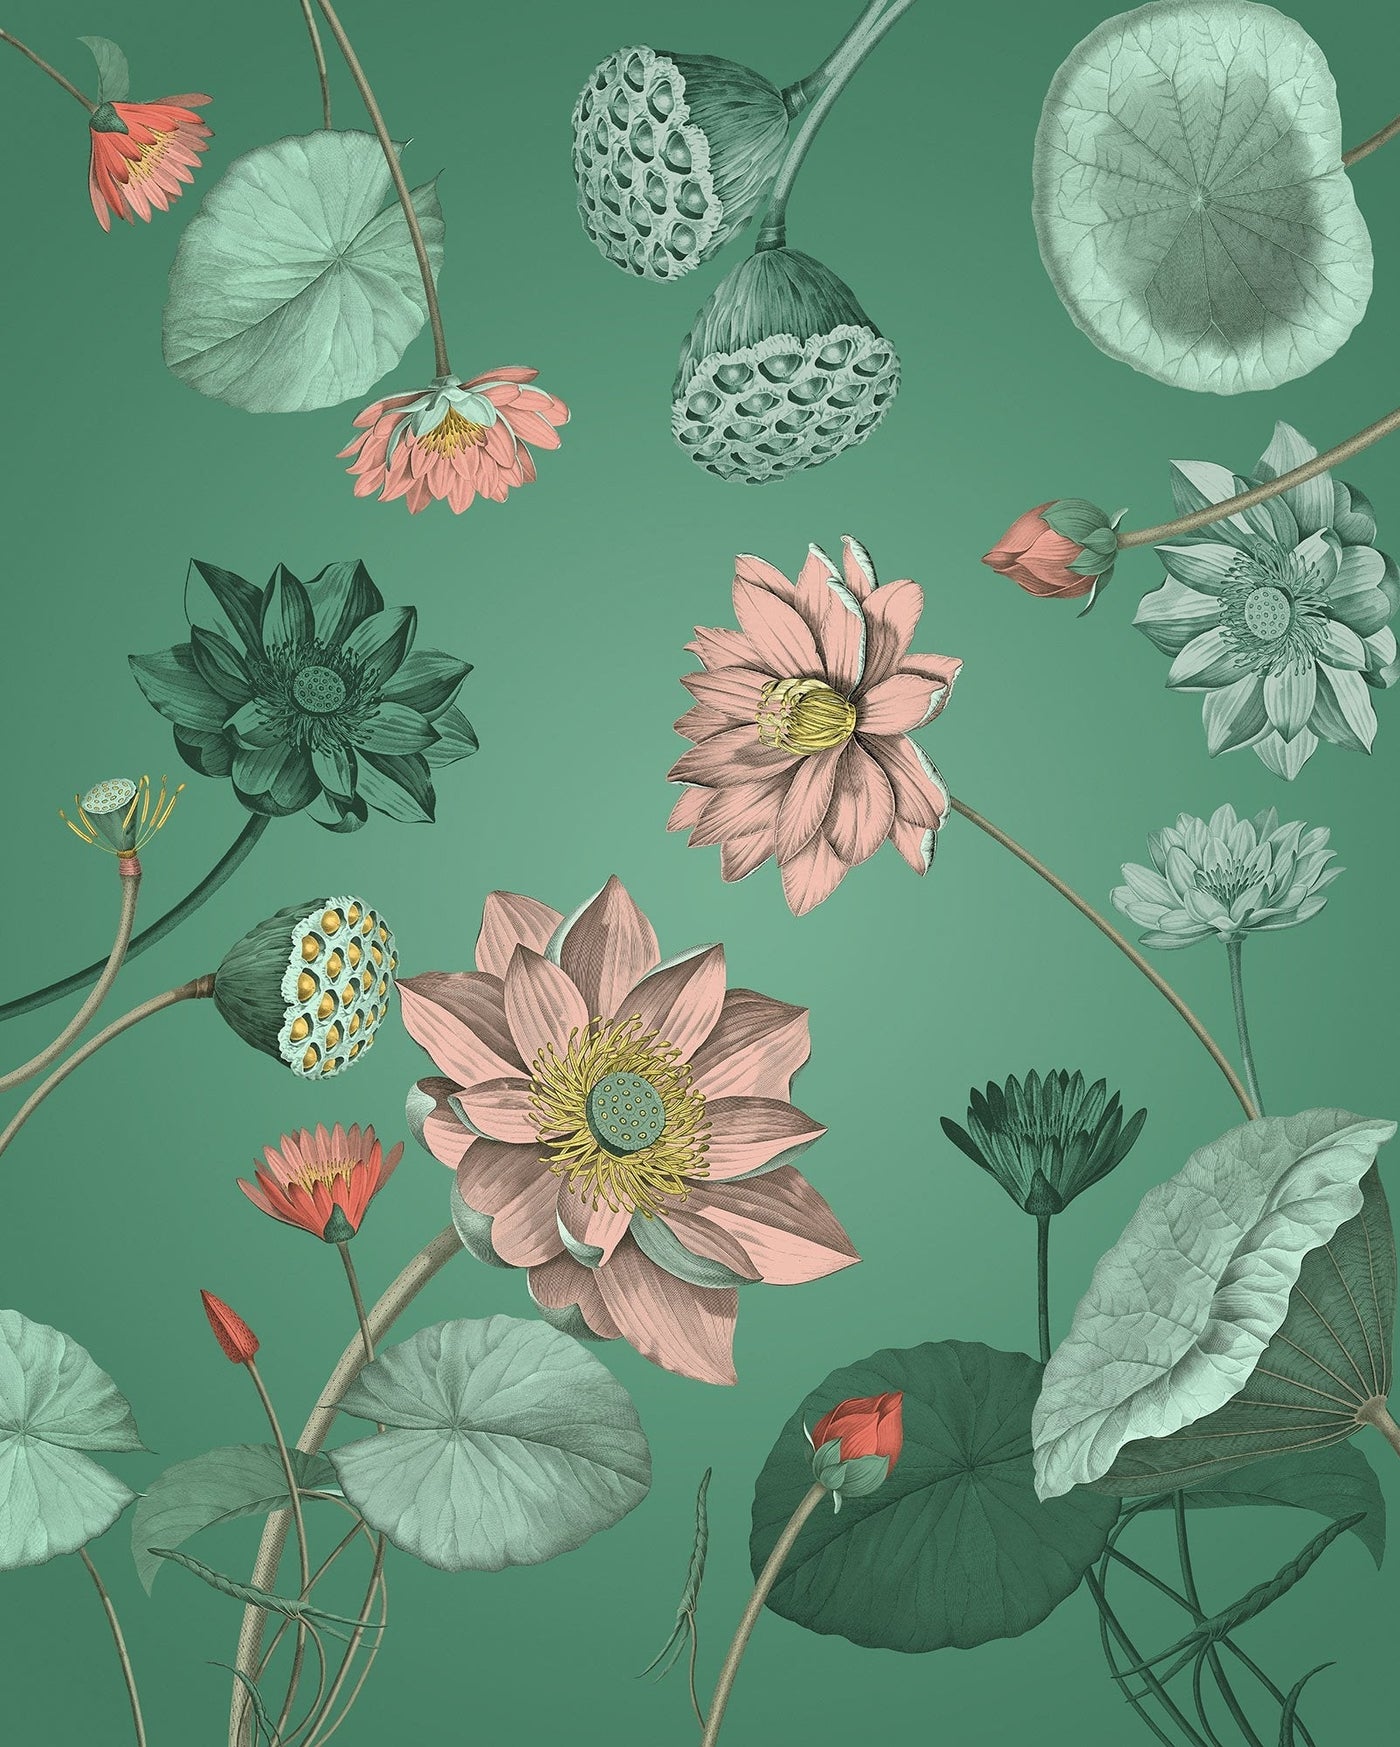 Flowers in Bliss Mural Wallpaper-Wall Decor-ECO MURALS, FLORAL WALLPAPERS, MURALS, MURALS / WALLPAPERS, NON-WOVEN WALLPAPER-Forest Homes-Nature inspired decor-Nature decor